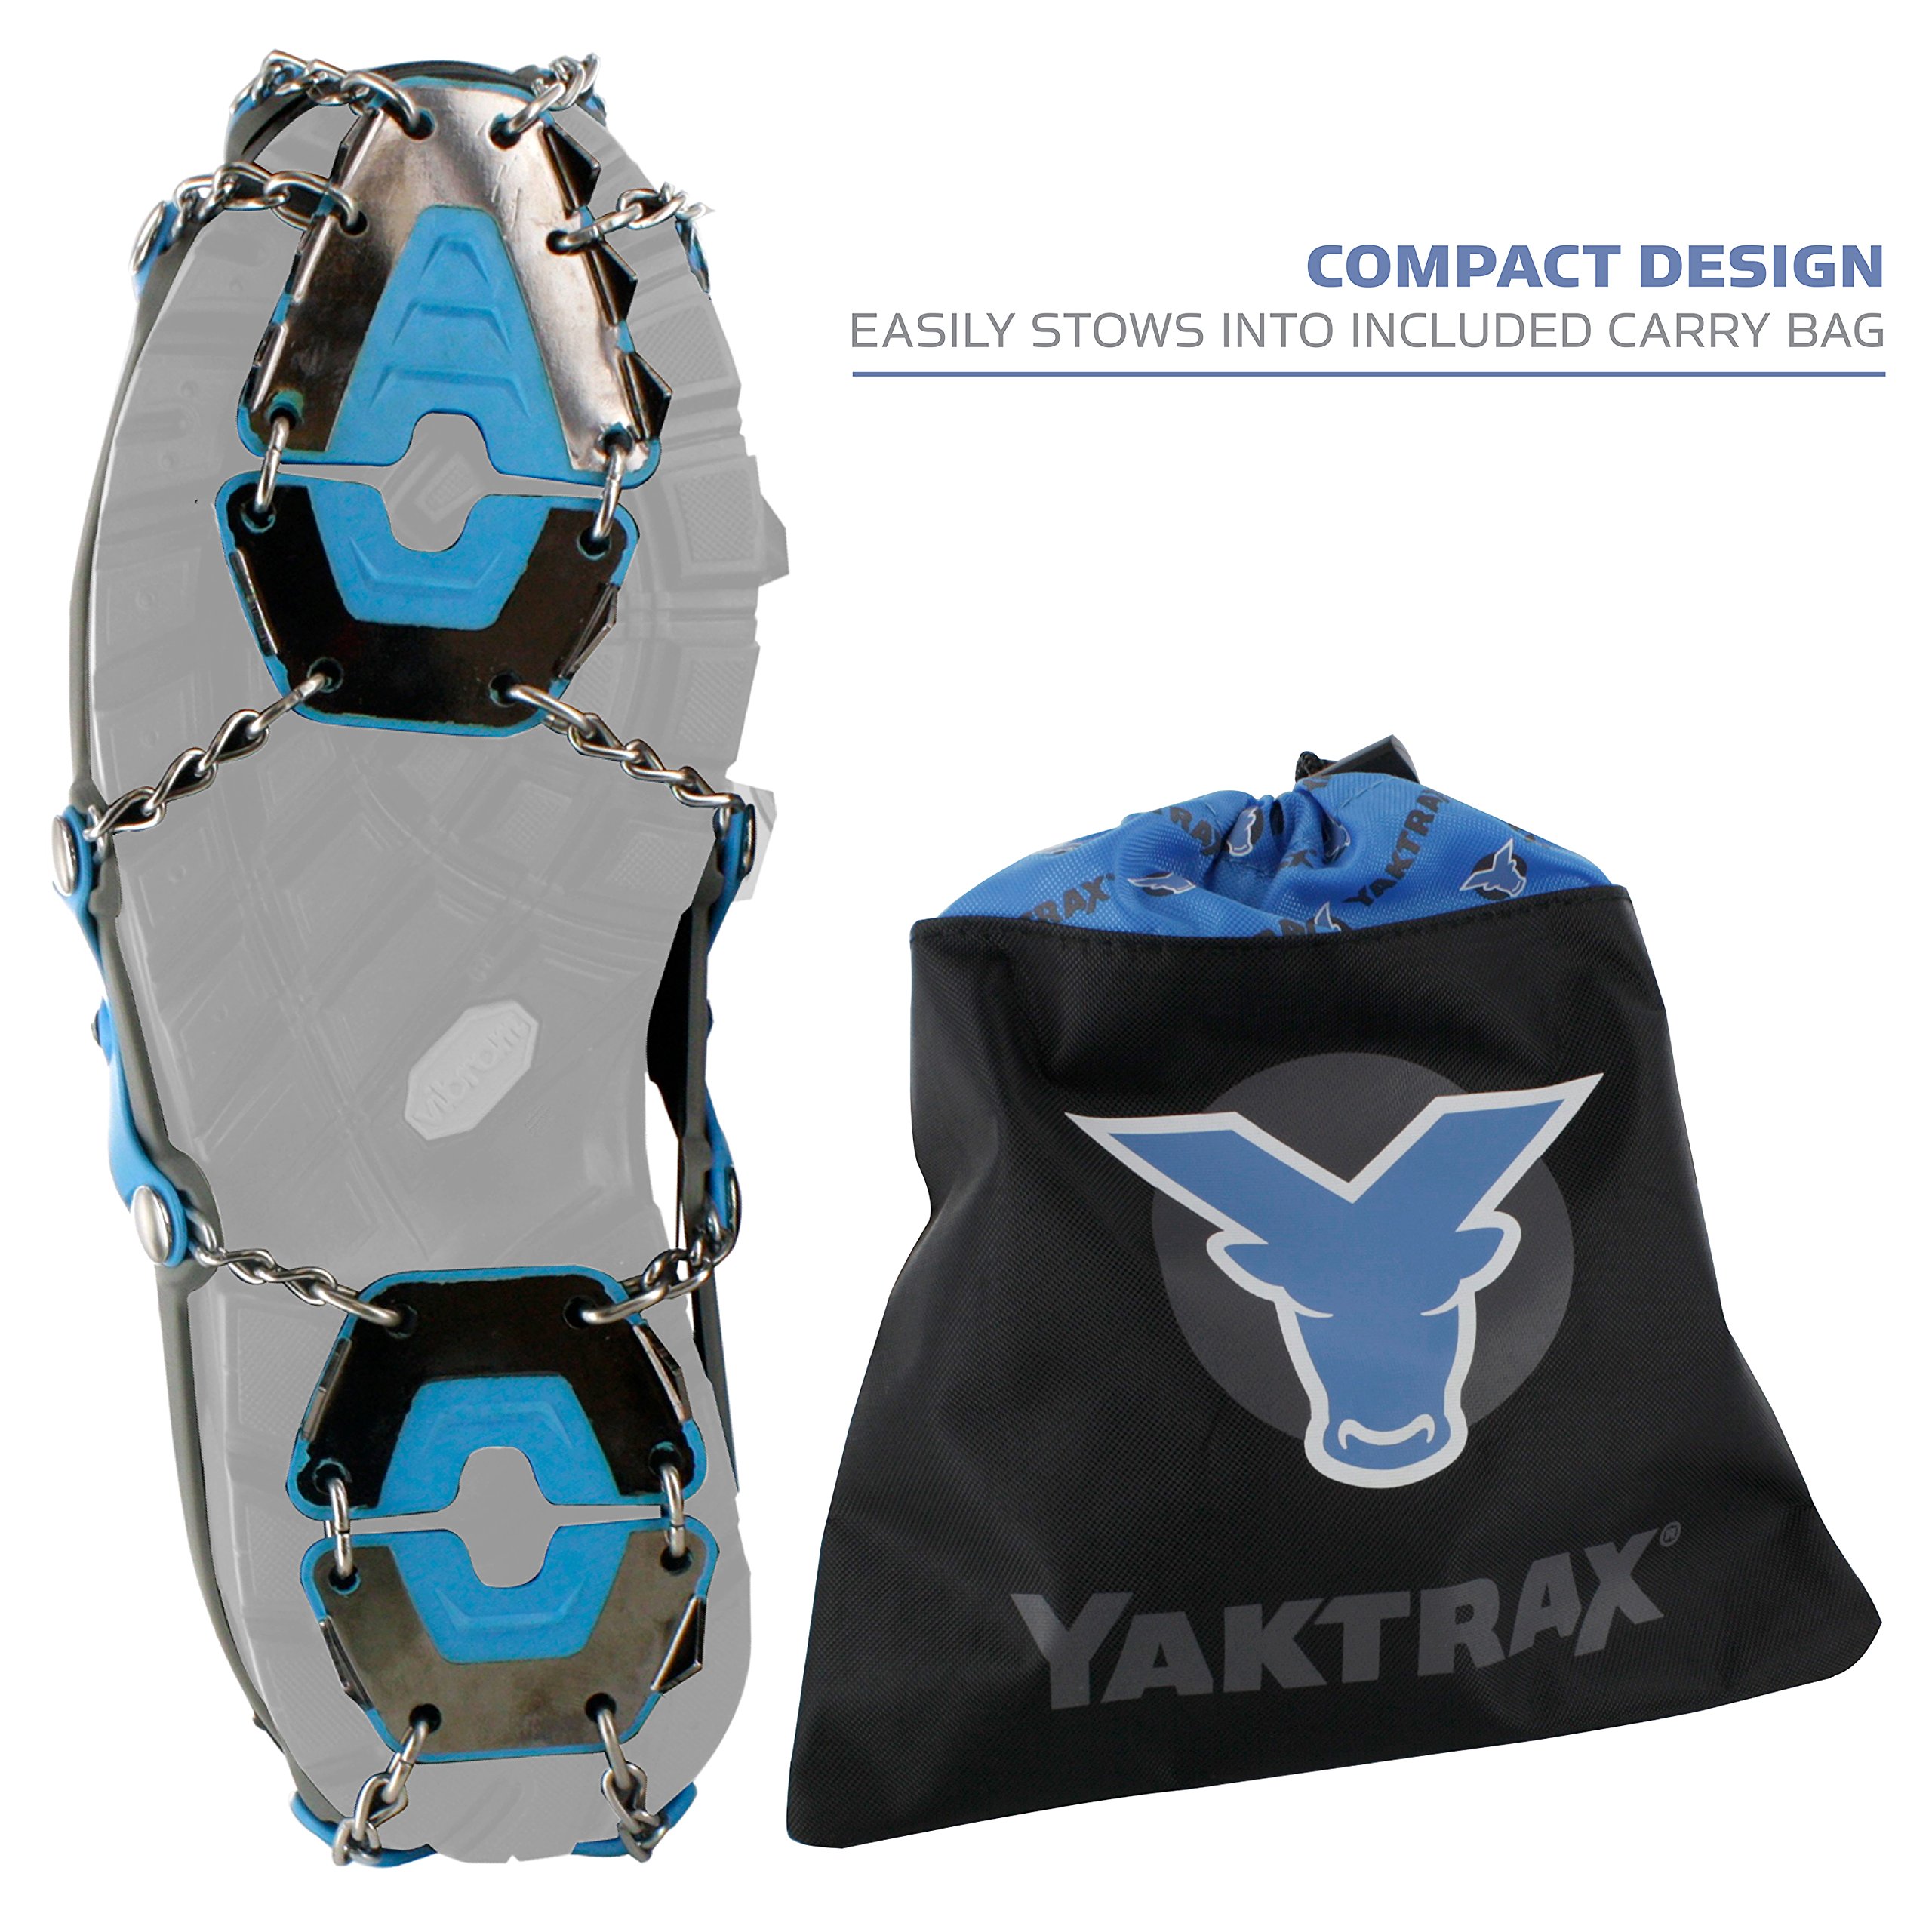 Yaktrax Summit Heavy Duty Traction Cleats with Carbon Steel Spikes for Snow and Ice (1 Pair)